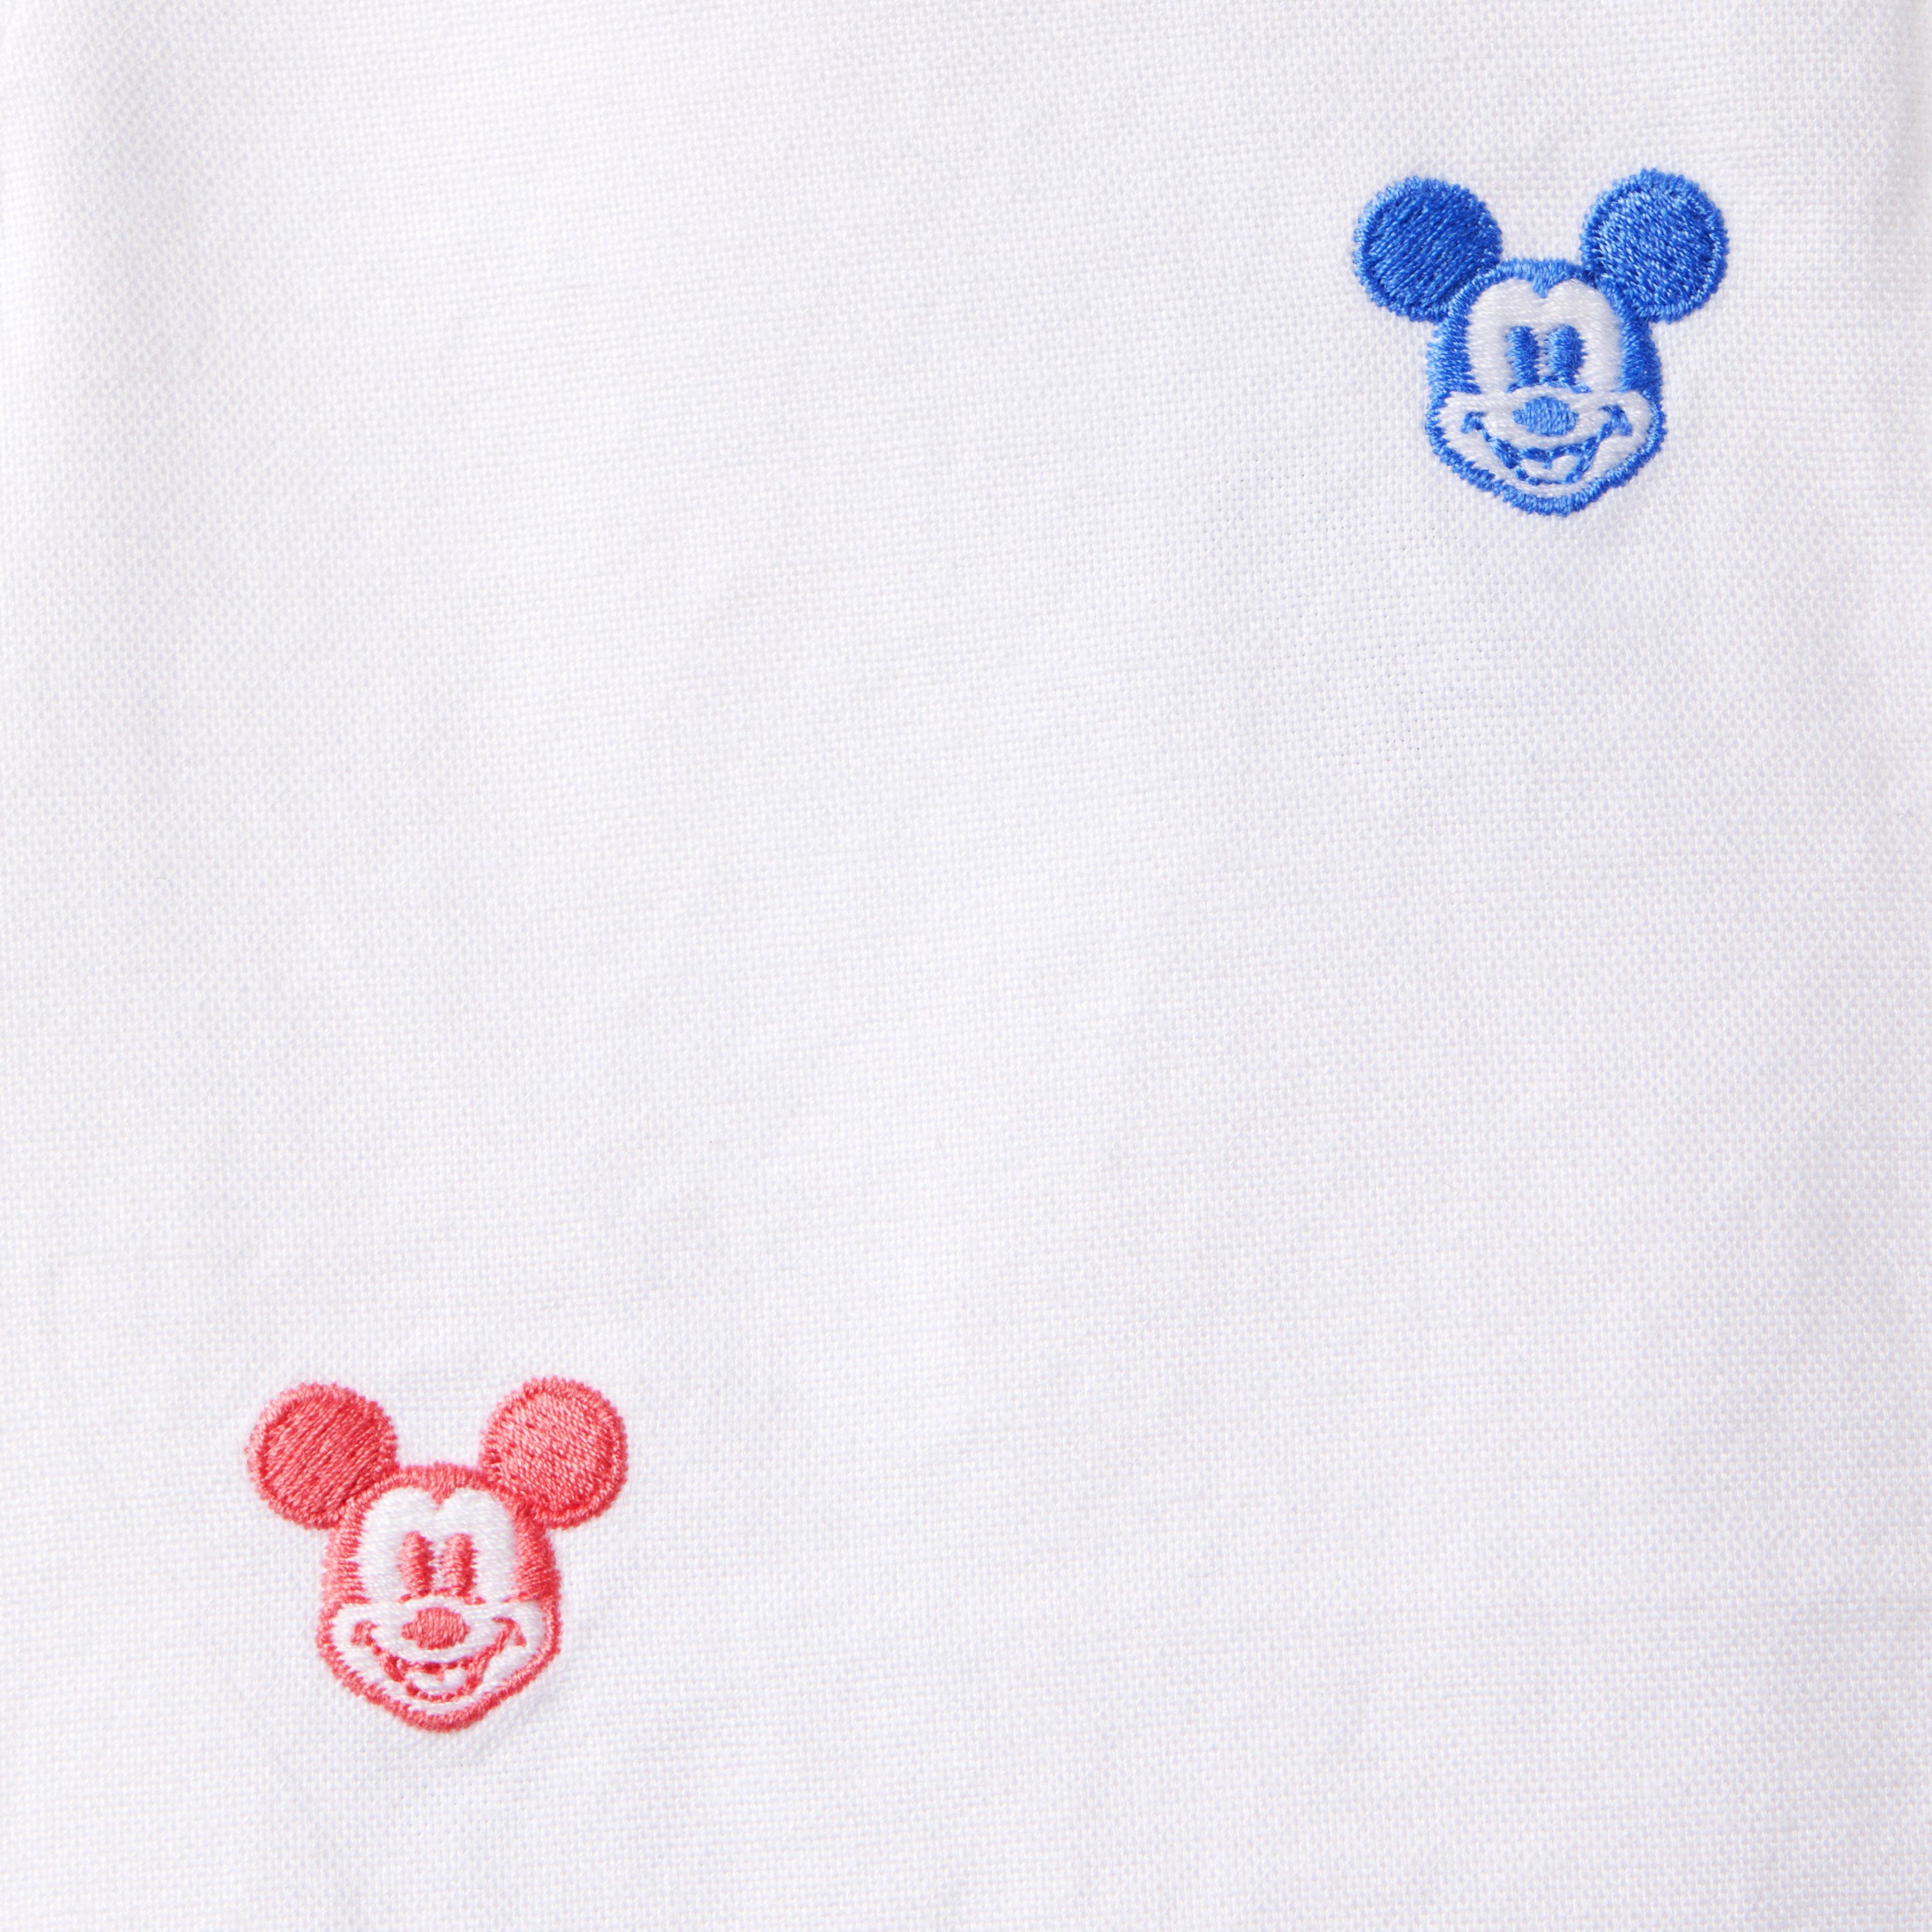 Disney Mickey Mouse Oxford Shirt image number 2